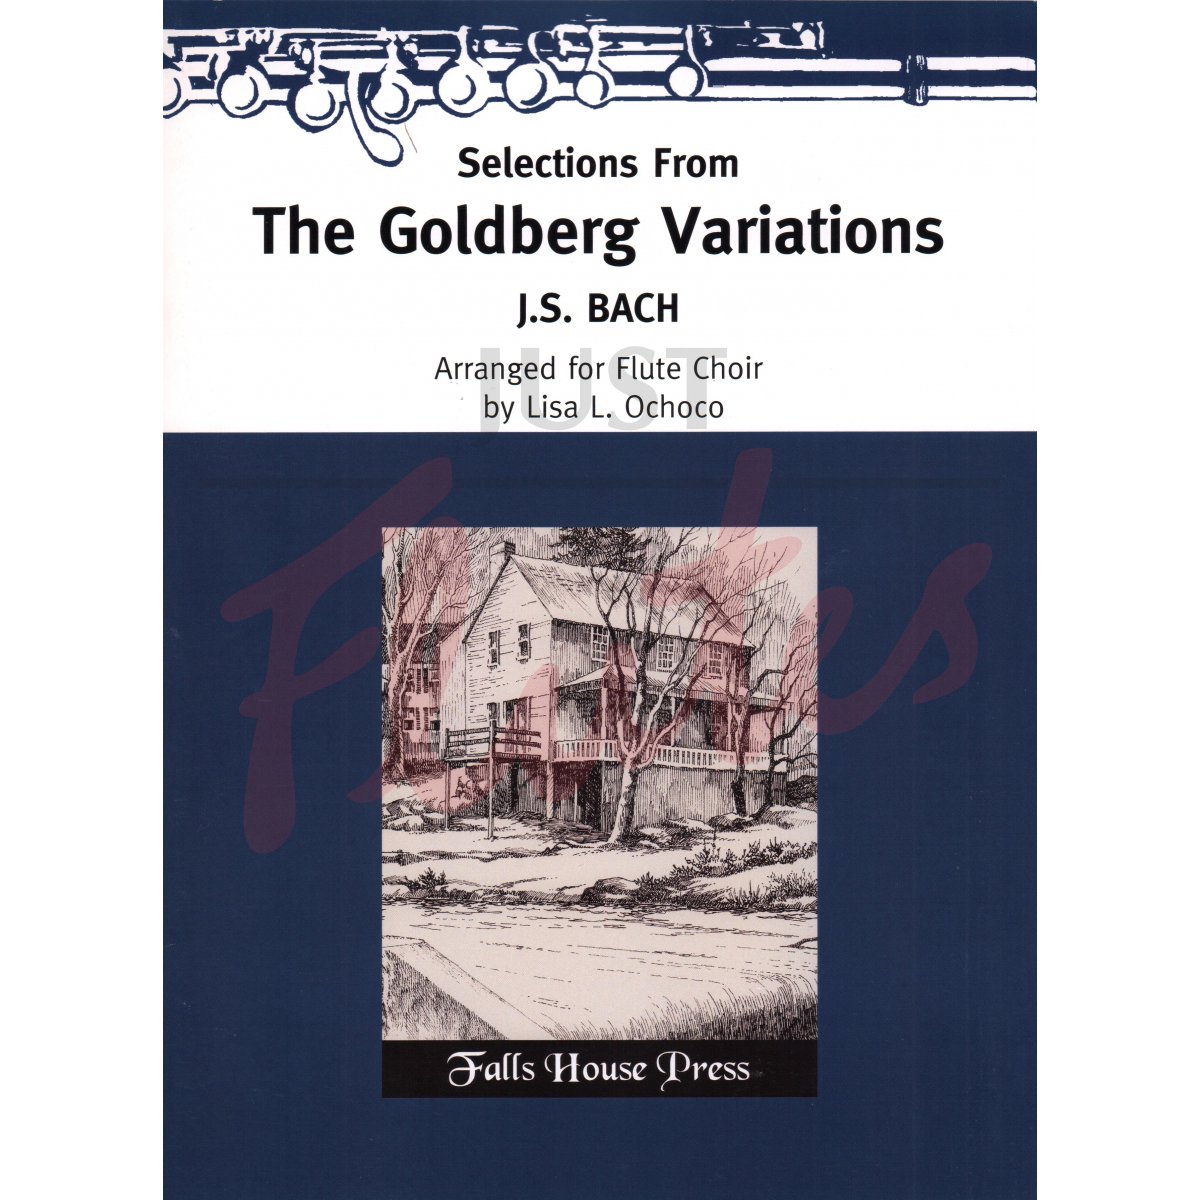 Selections from The Goldberg Variations for Flute Choir